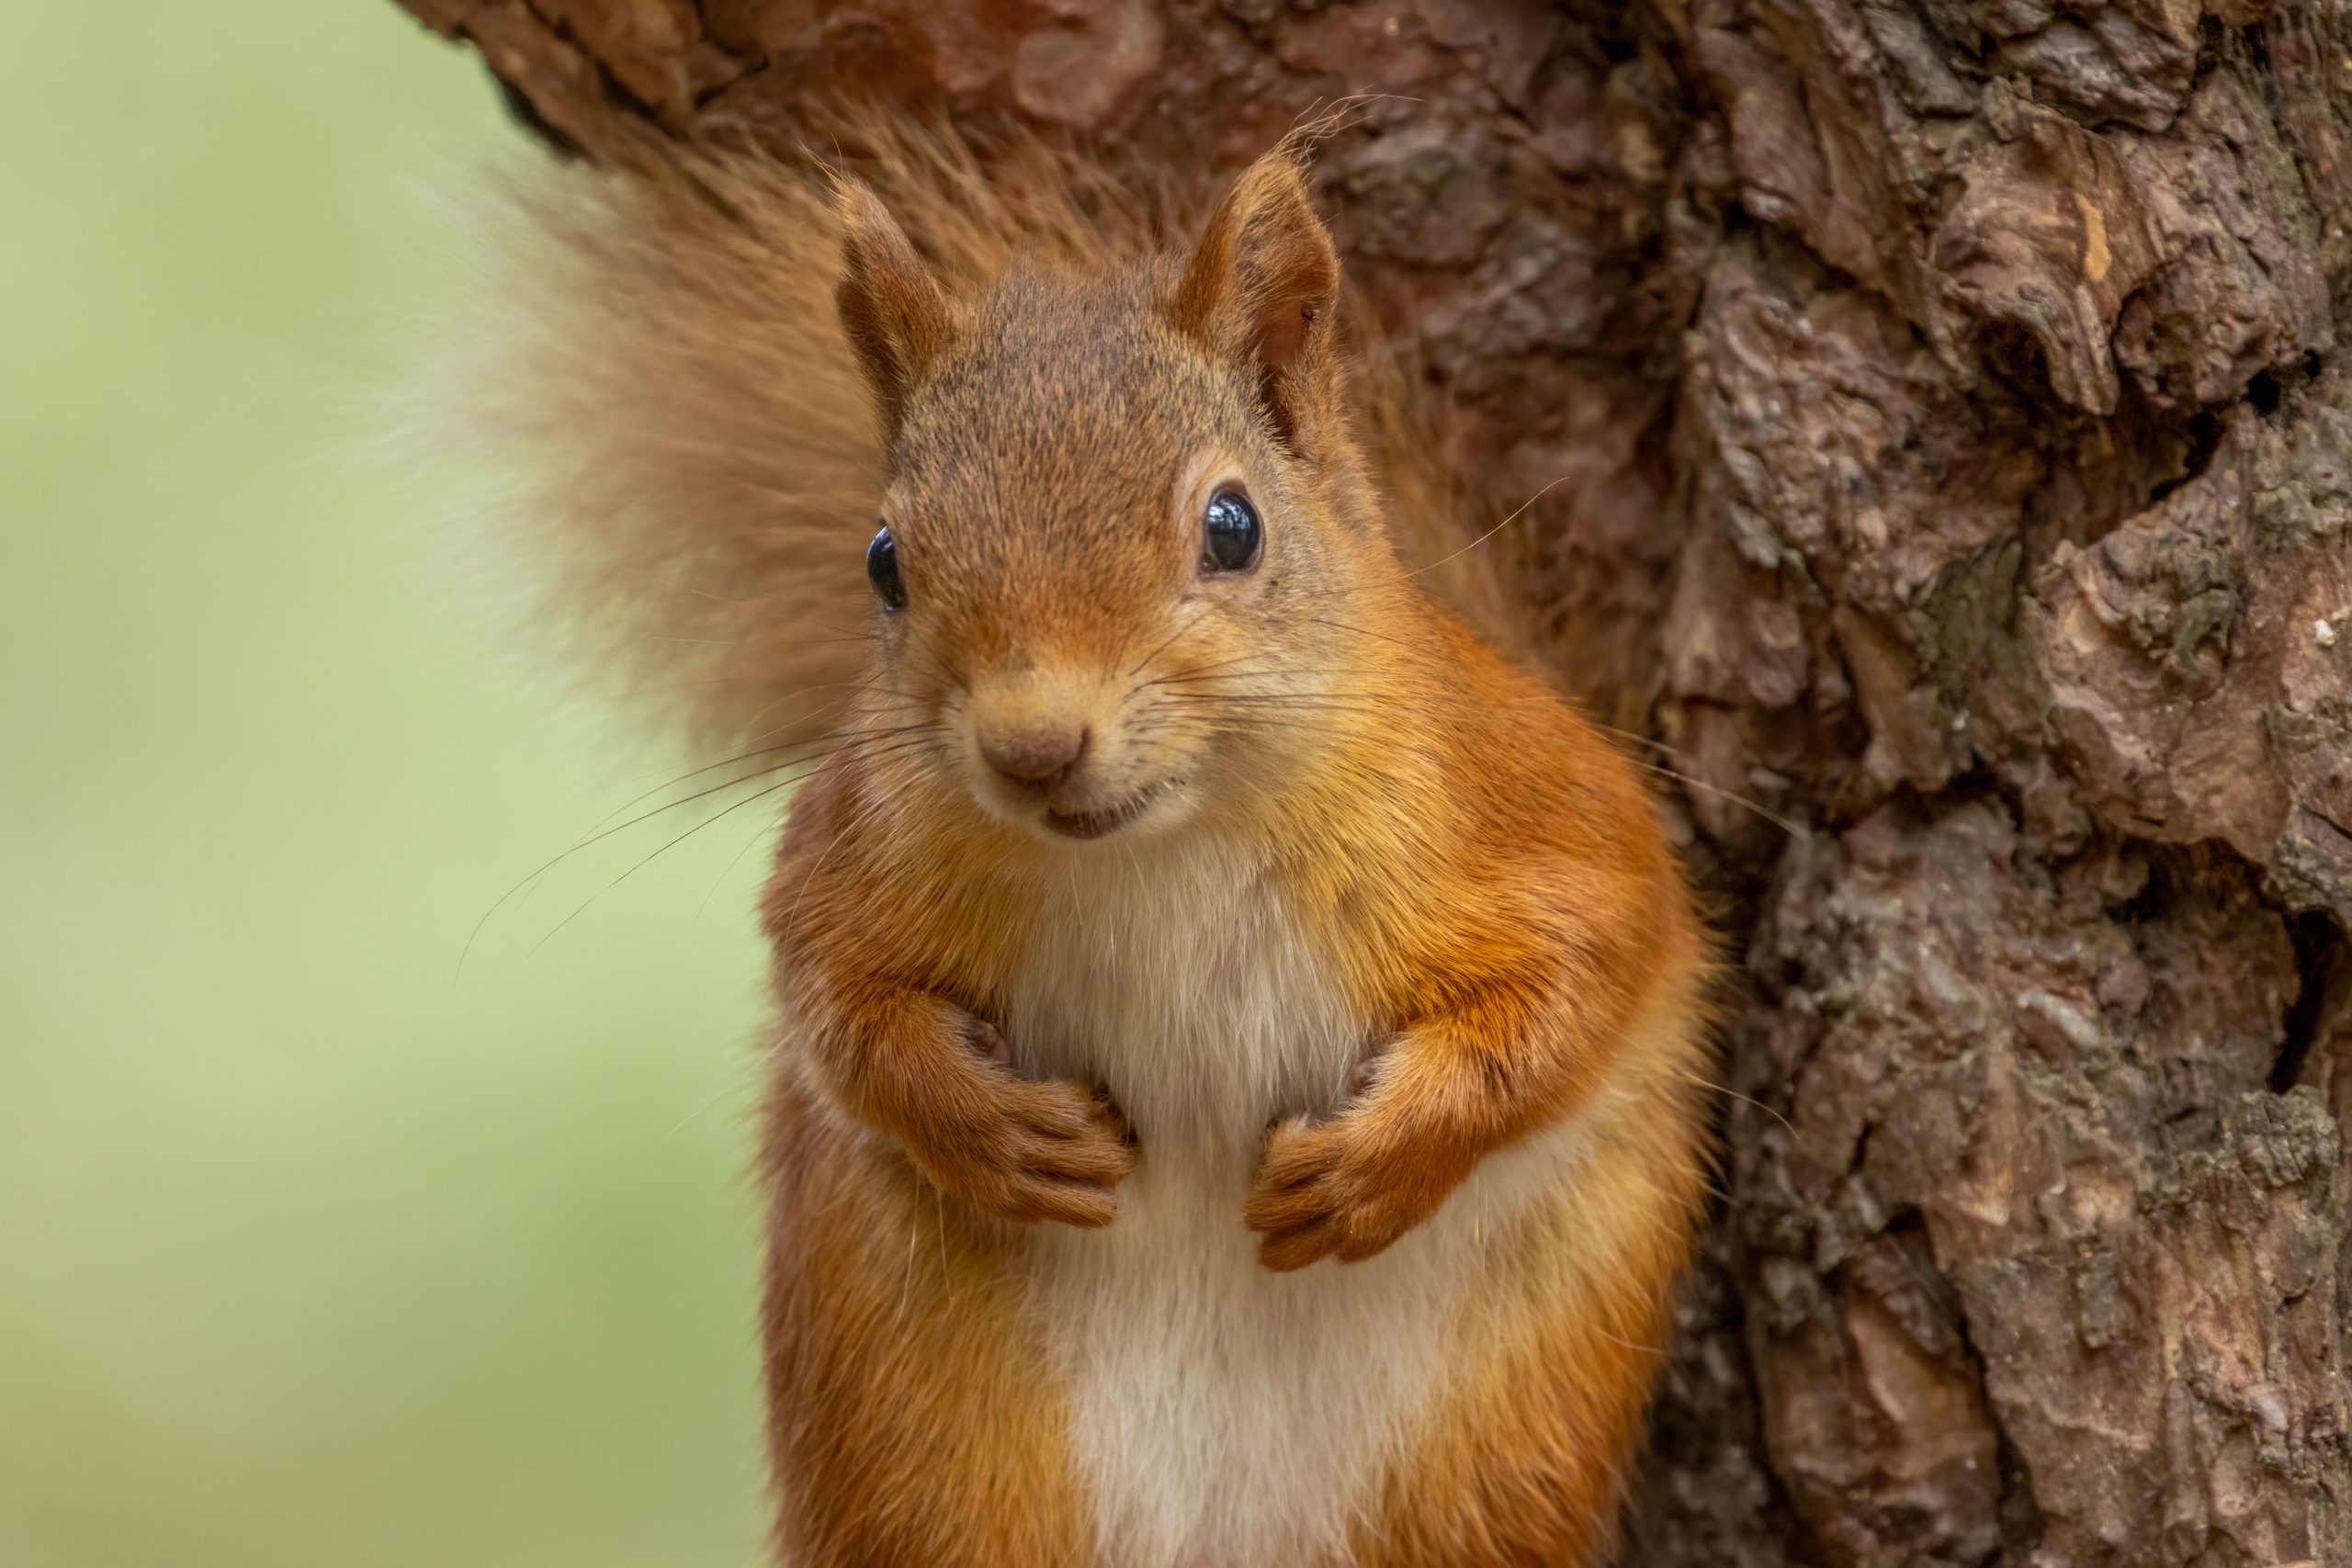 Are red squirrels smart?